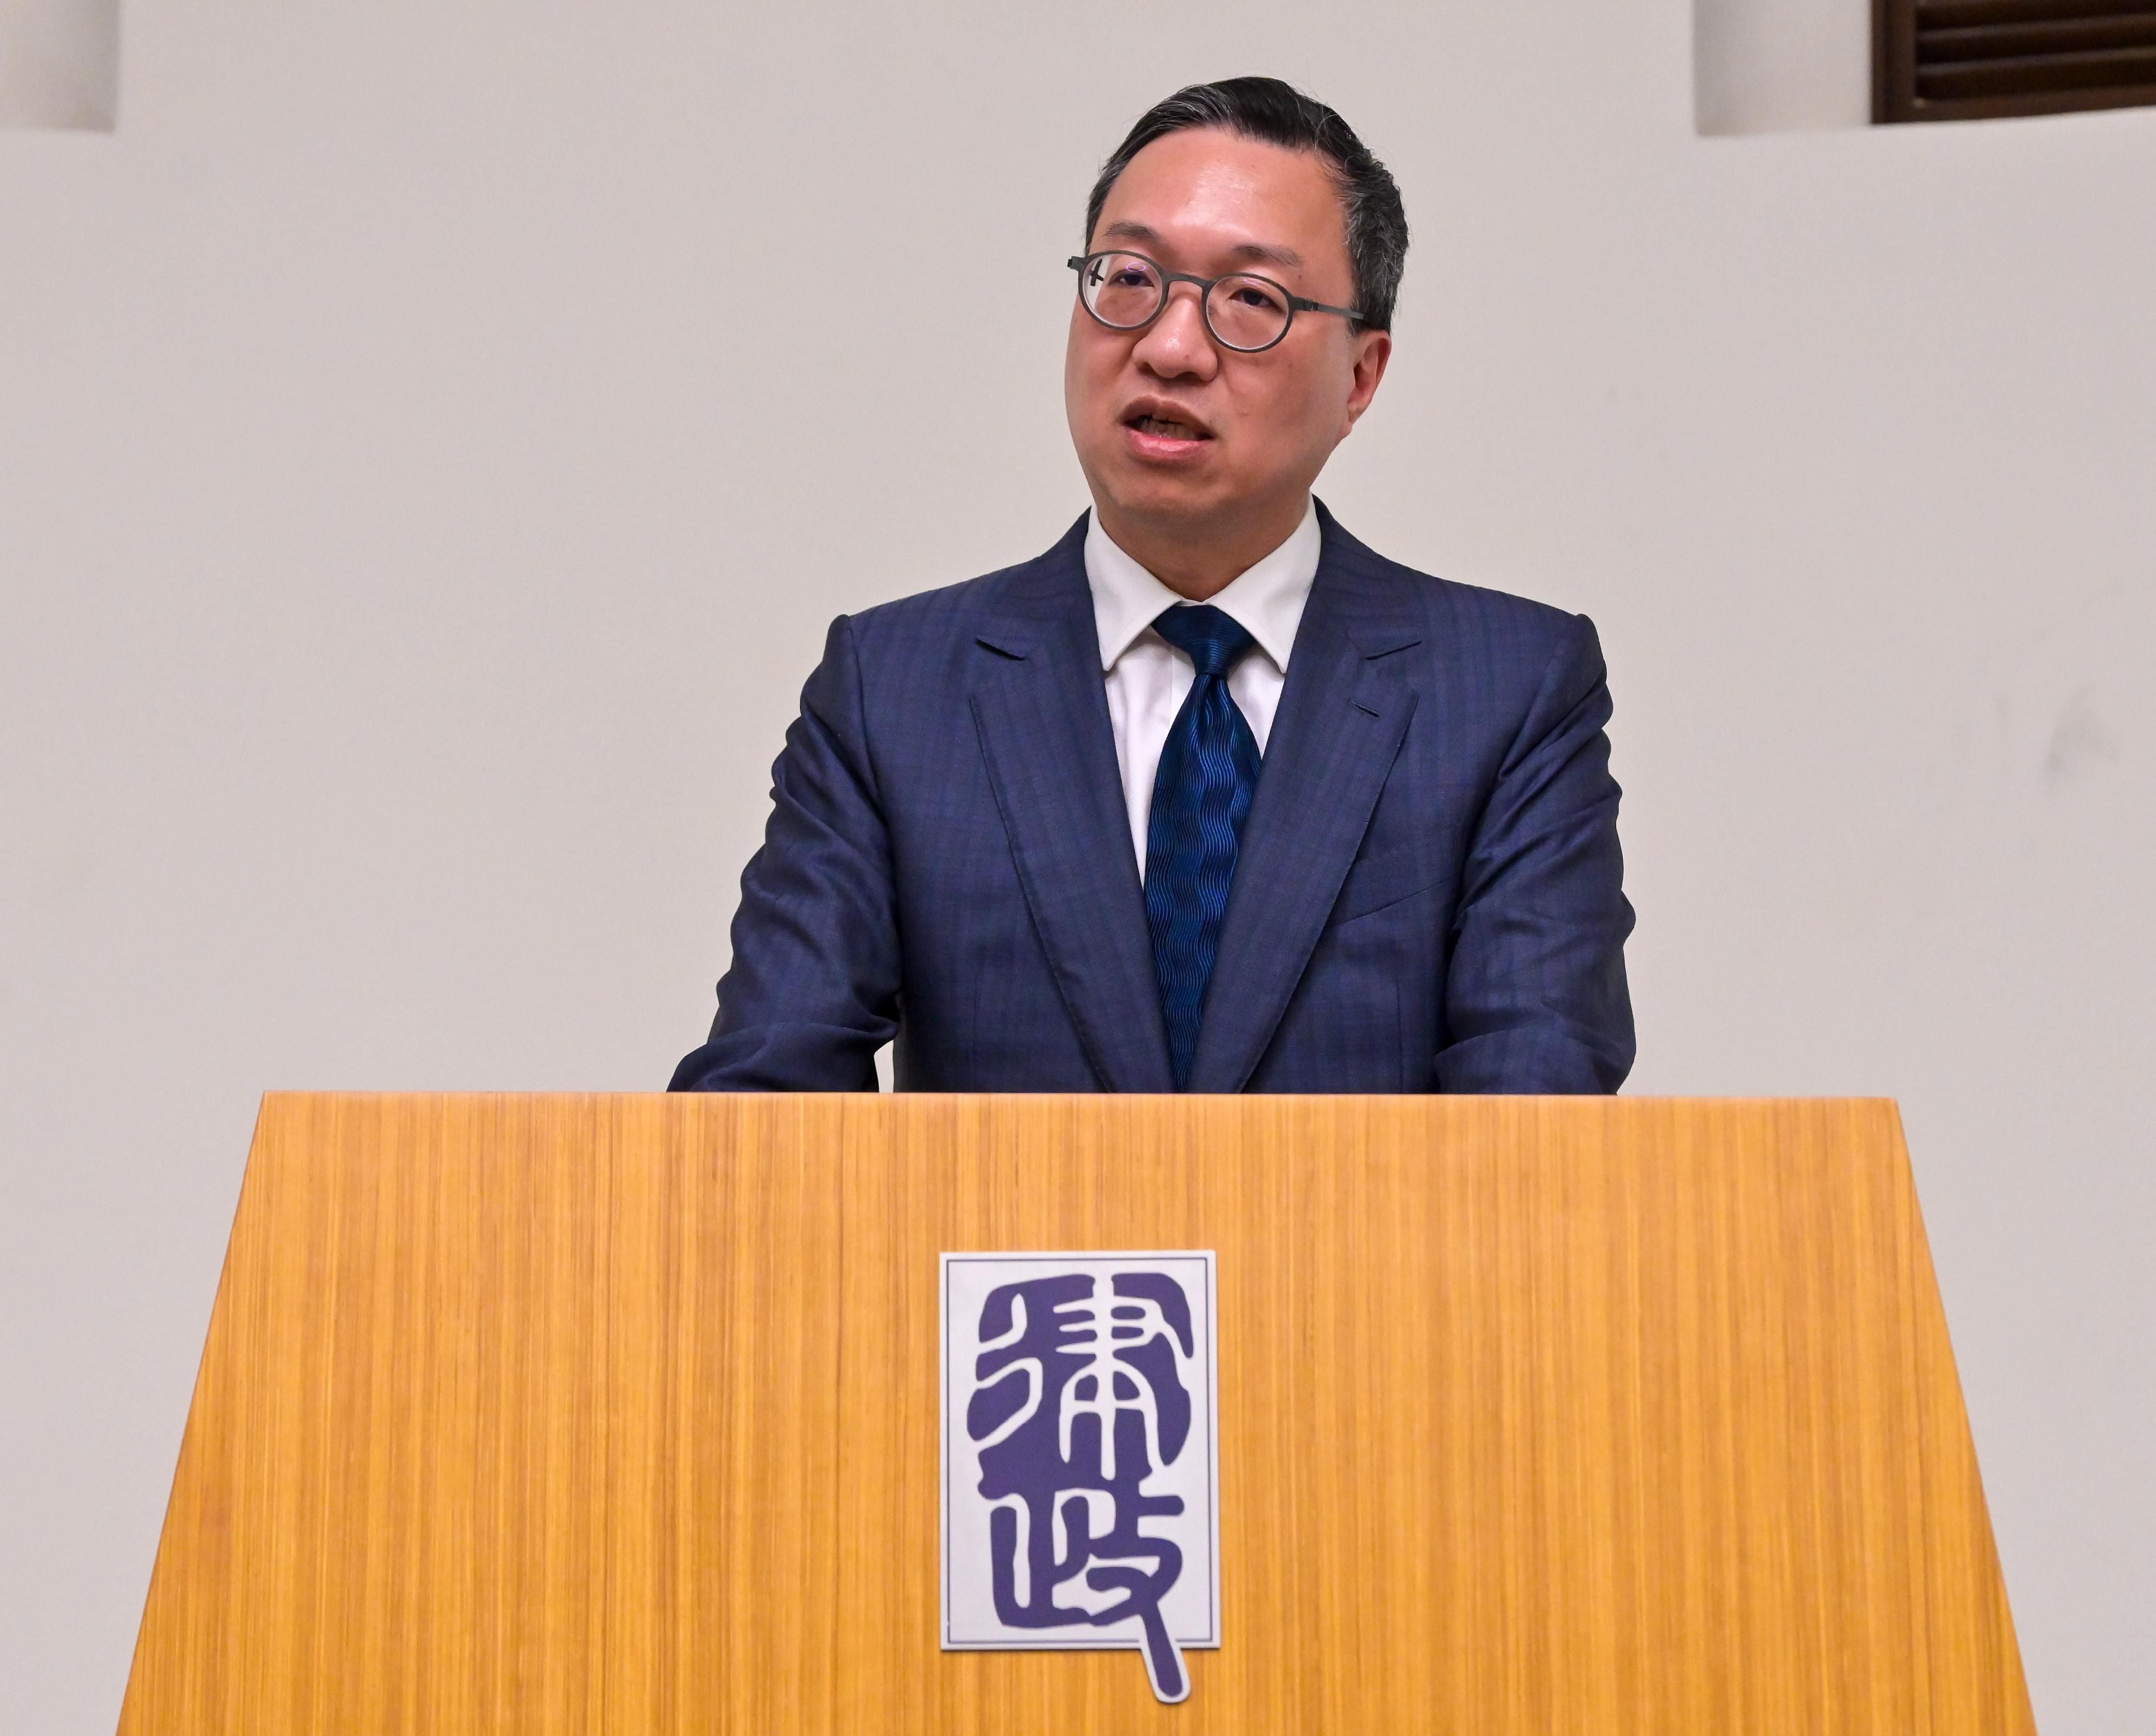 The Department of Justice of the Hong Kong Special Administrative Region and the Ministry of Justice of the Kingdom of Saudi Arabia signed a Memorandum of Understanding of Cooperation today (April 22) to strengthen their co-operation on issues relating to dispute avoidance and resolution. Photo shows the Secretary for Justice, Mr Paul Lam, SC, delivering his speech at the signing ceremony.